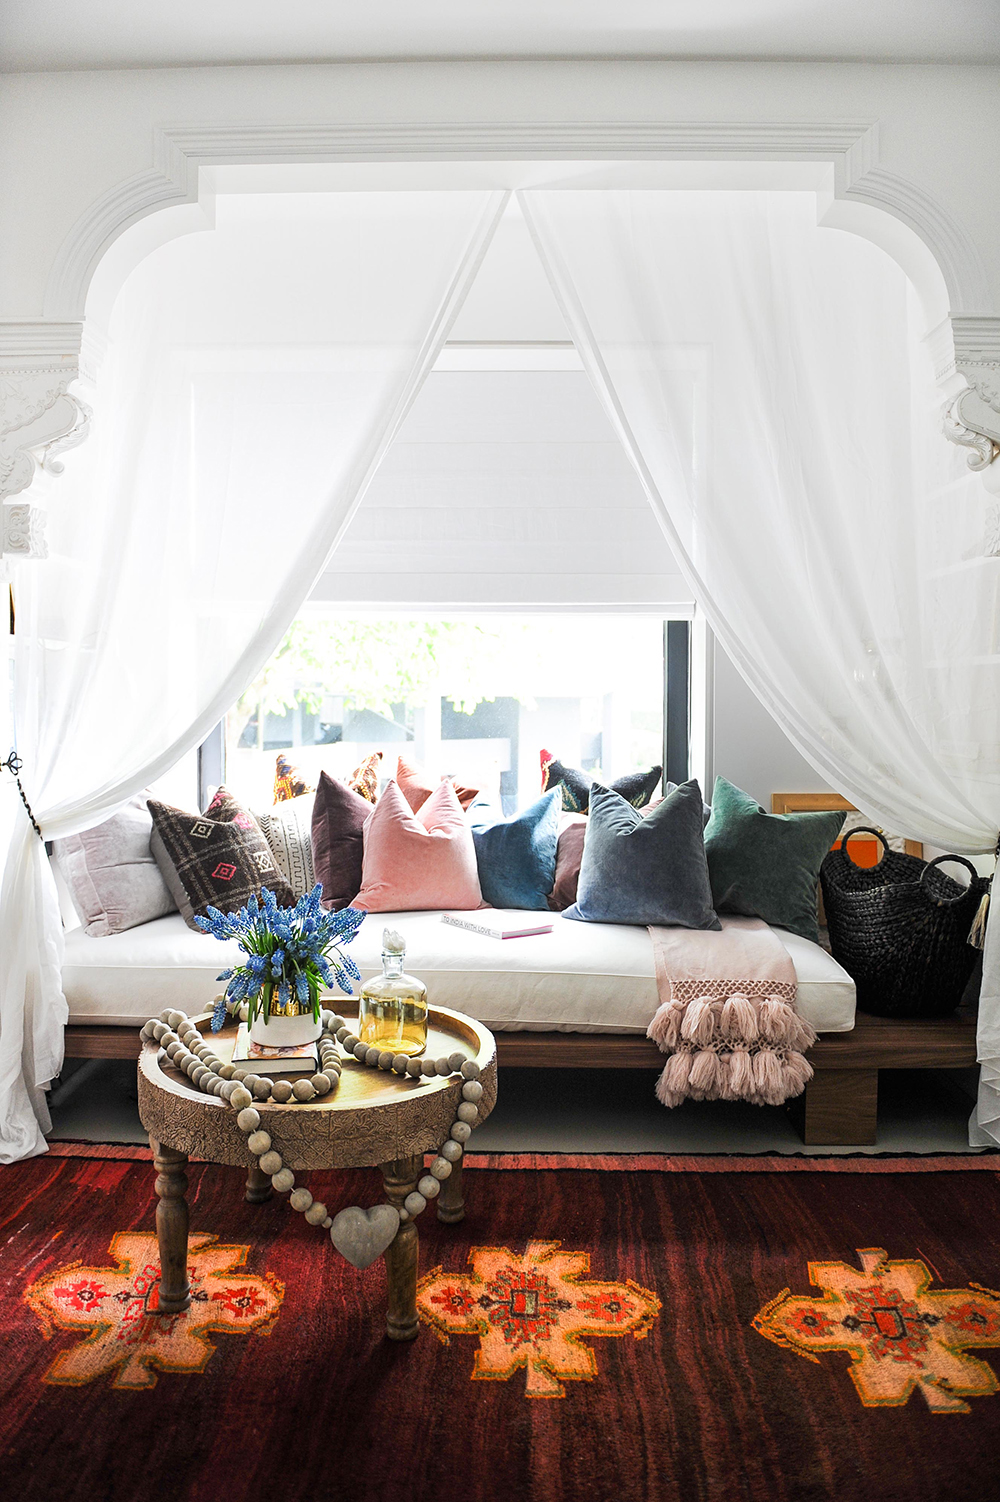 white curtained daybed covered in cushions in an alcove, colourful rug with three orange designs